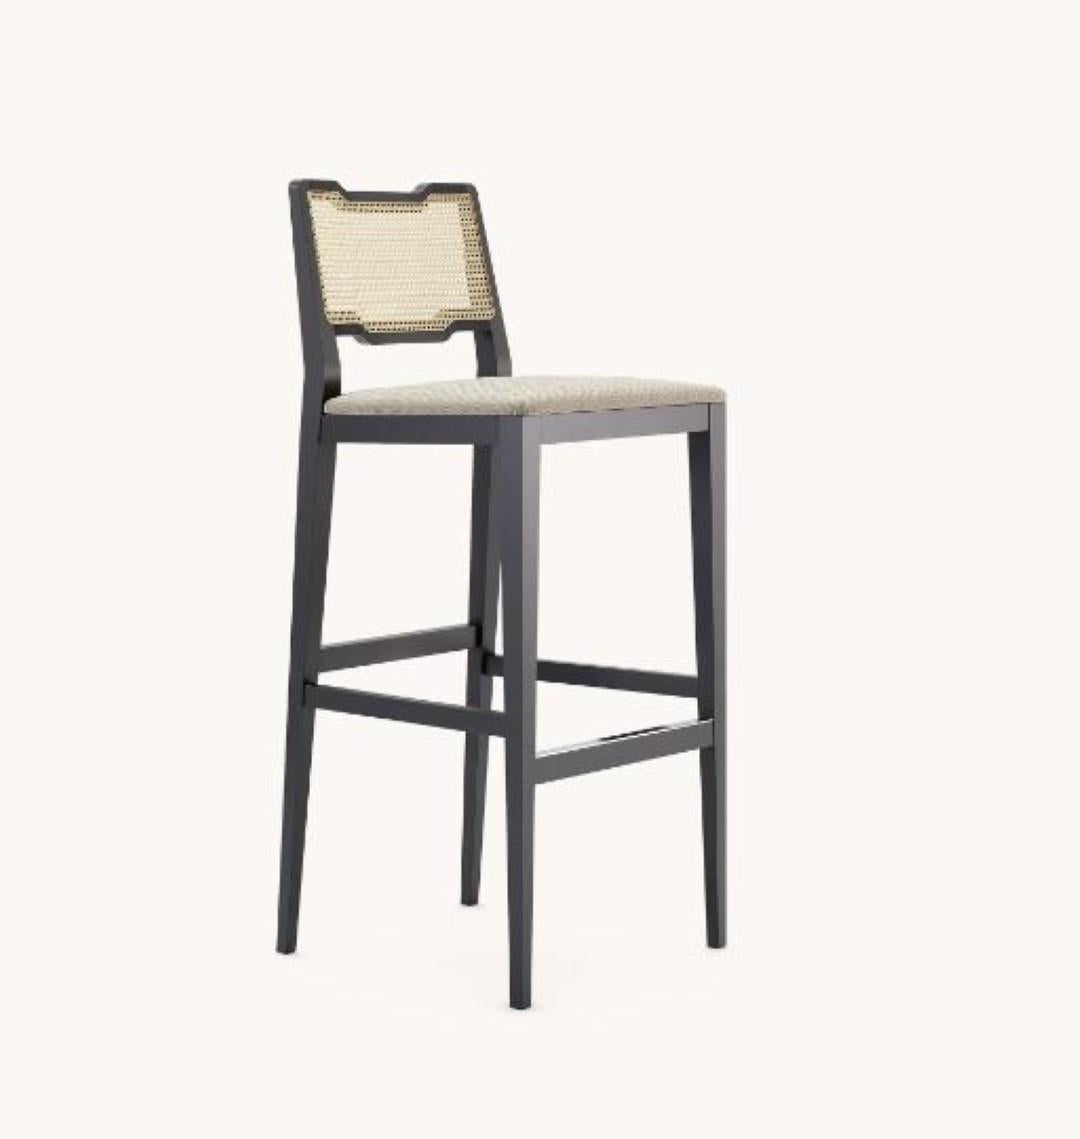 Eva bar chair by Domkapa
Materials: patterned, black lacquered, wood. 
Dimensions: W 46 x D 47 x H 110 cm. 
Also available in different materials. 

Made to last, the solid wood structure of Eva bar and counter chairs are the perfect mixes of a